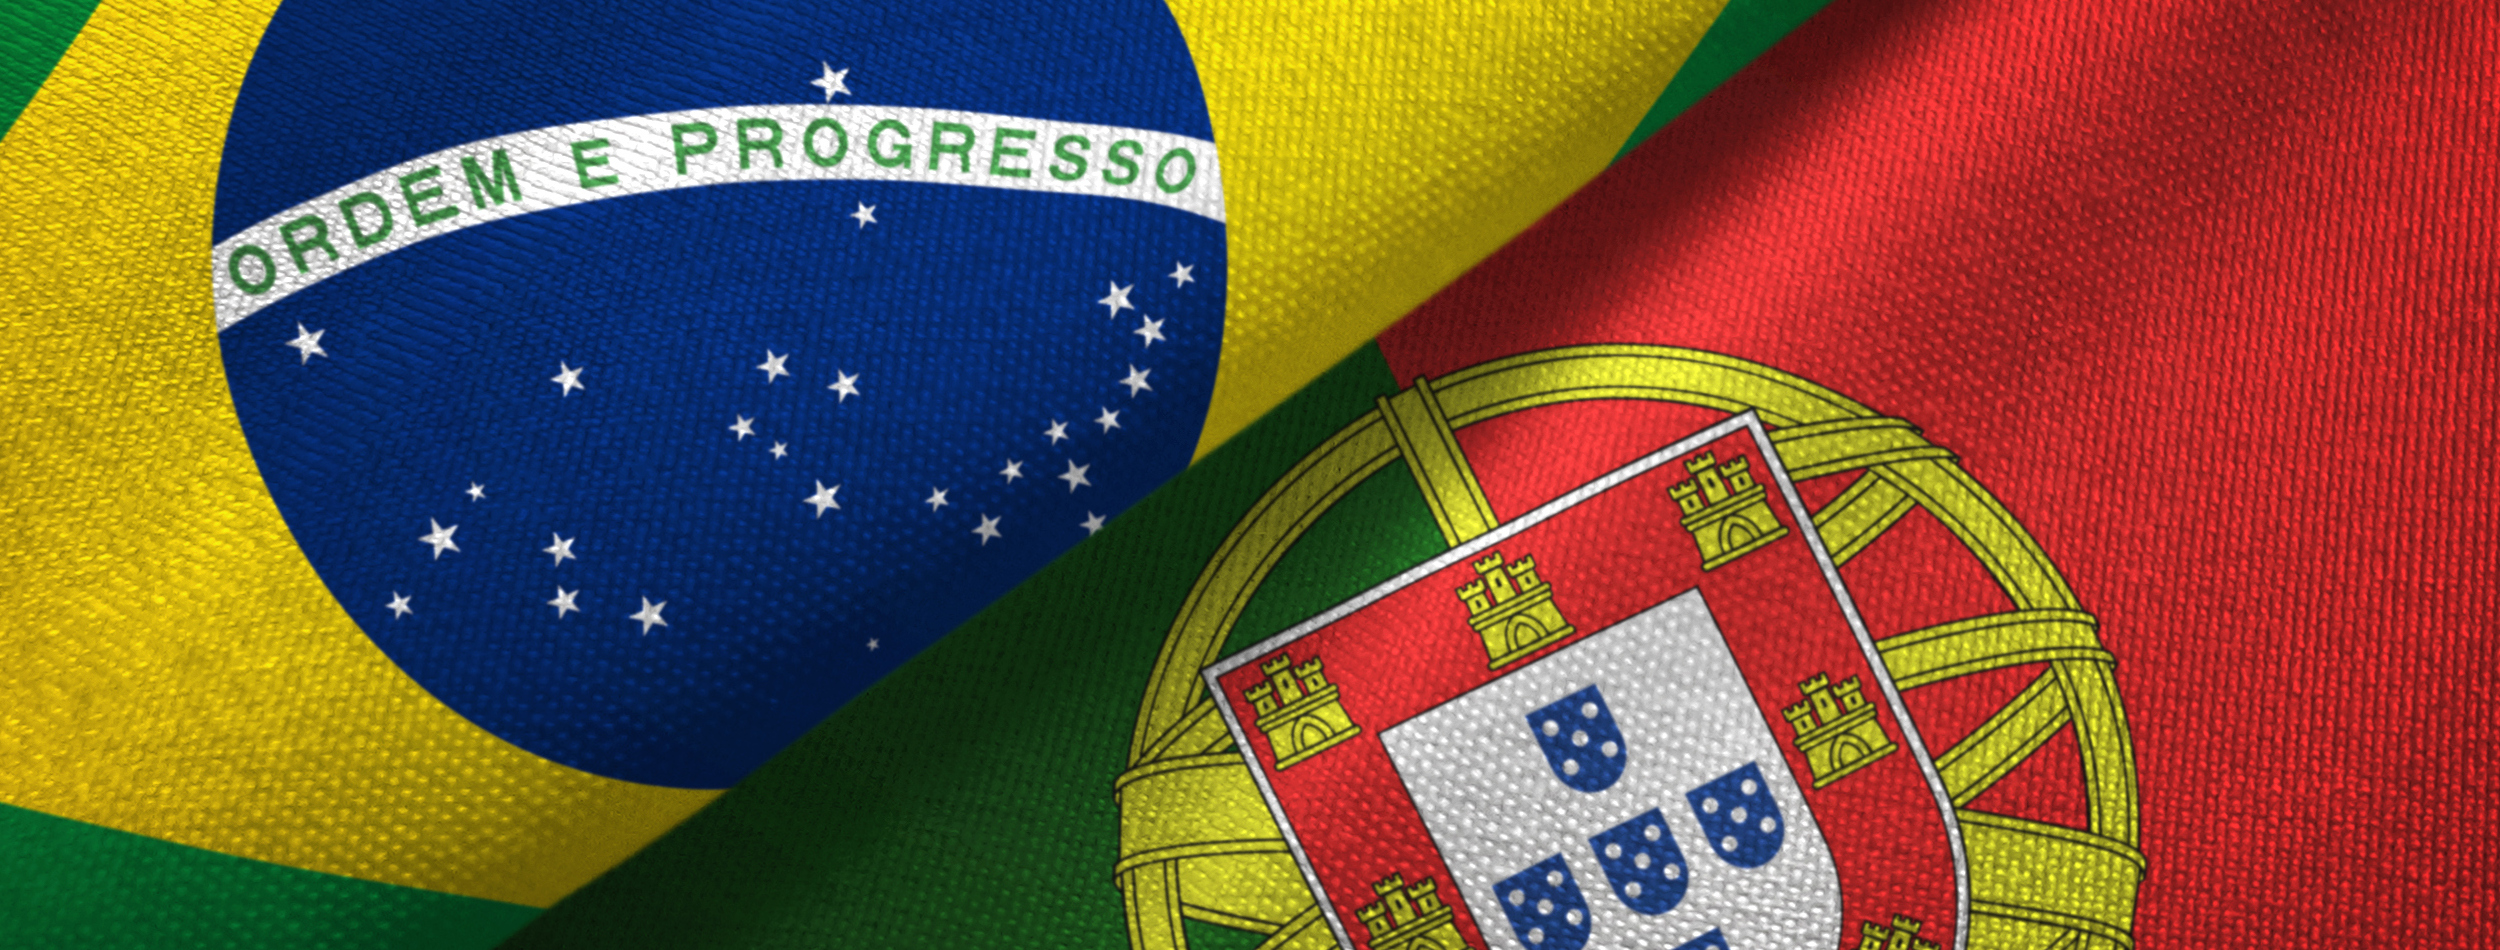 Portugal and Brazil flags together realtions textile cloth fabric texture